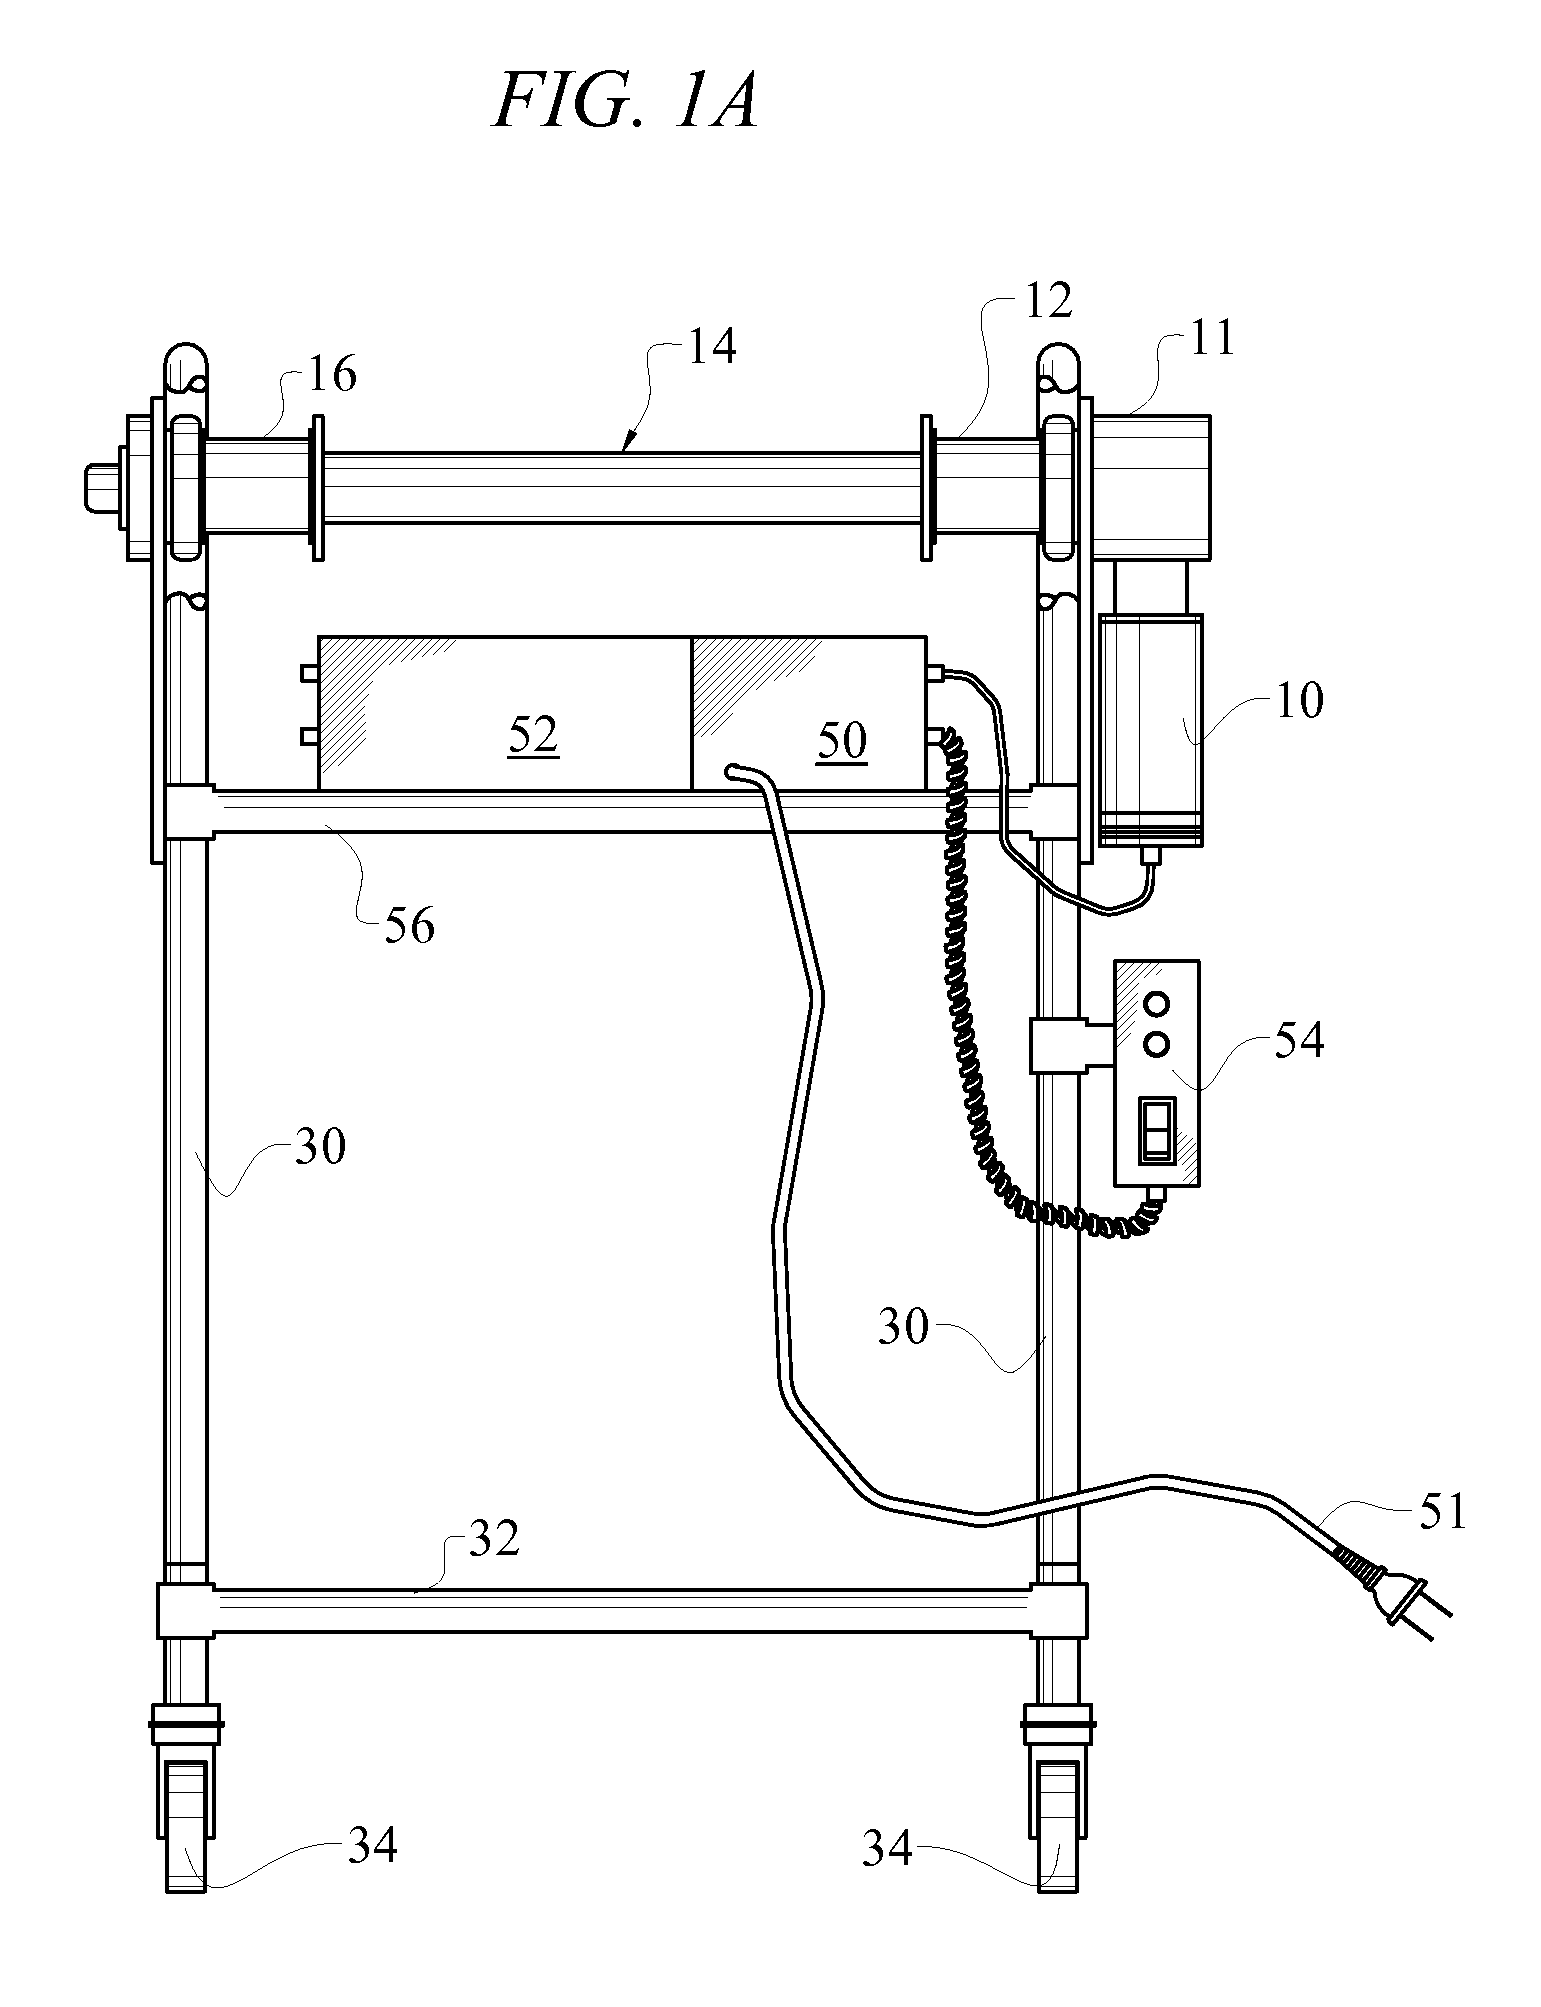 Method and apparatus for patient transfer